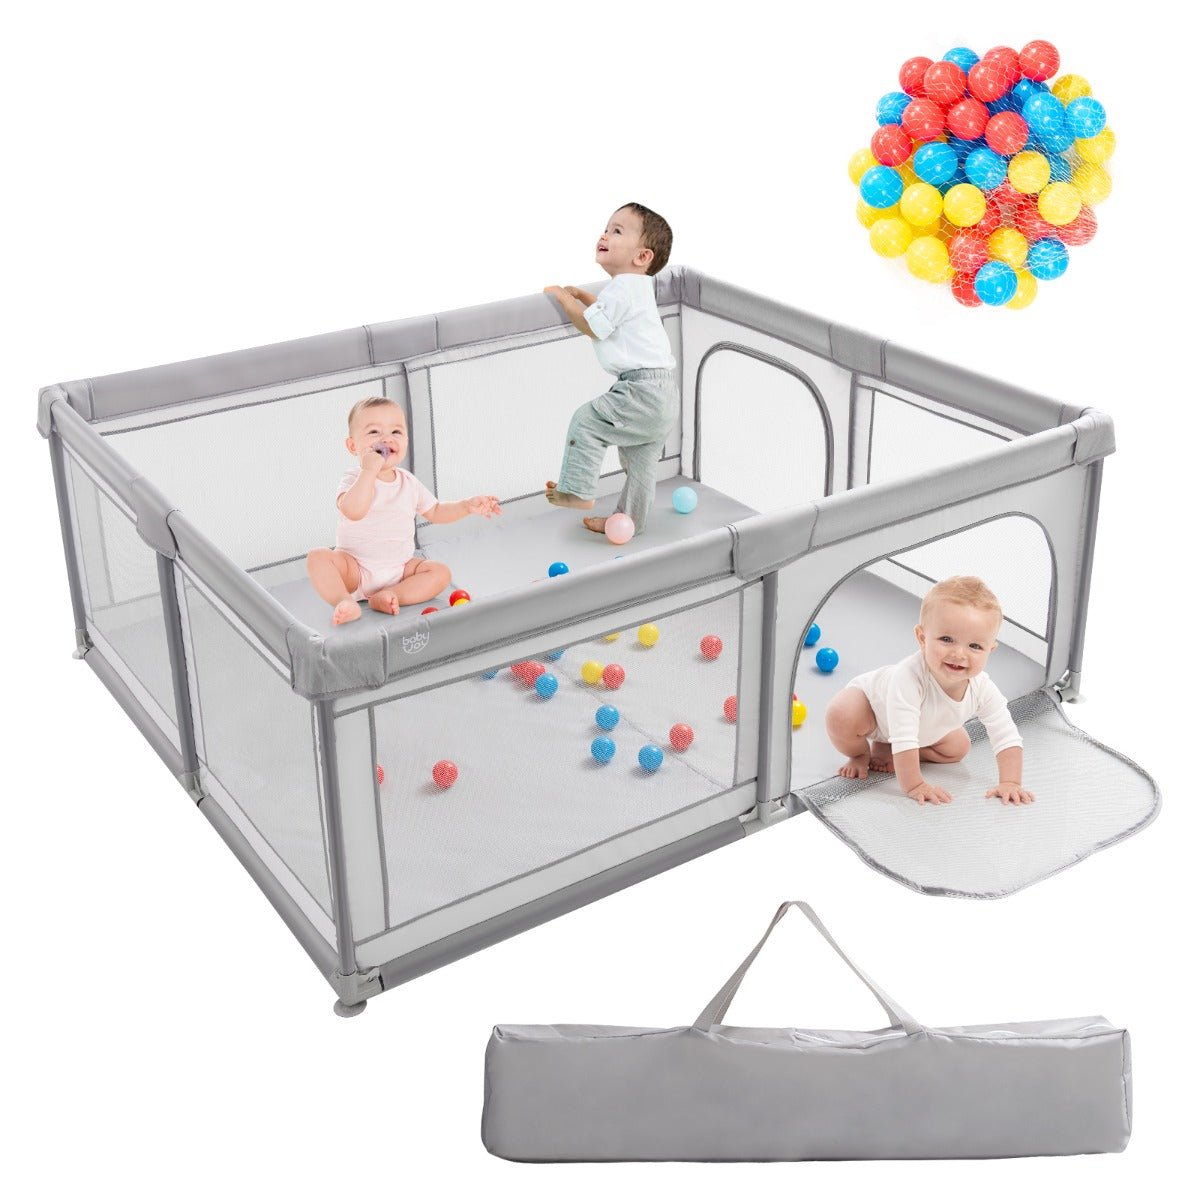 1.8m Playpen with Ocean Ball Pit for Babies and Toddlers: Extra Large Play Yard